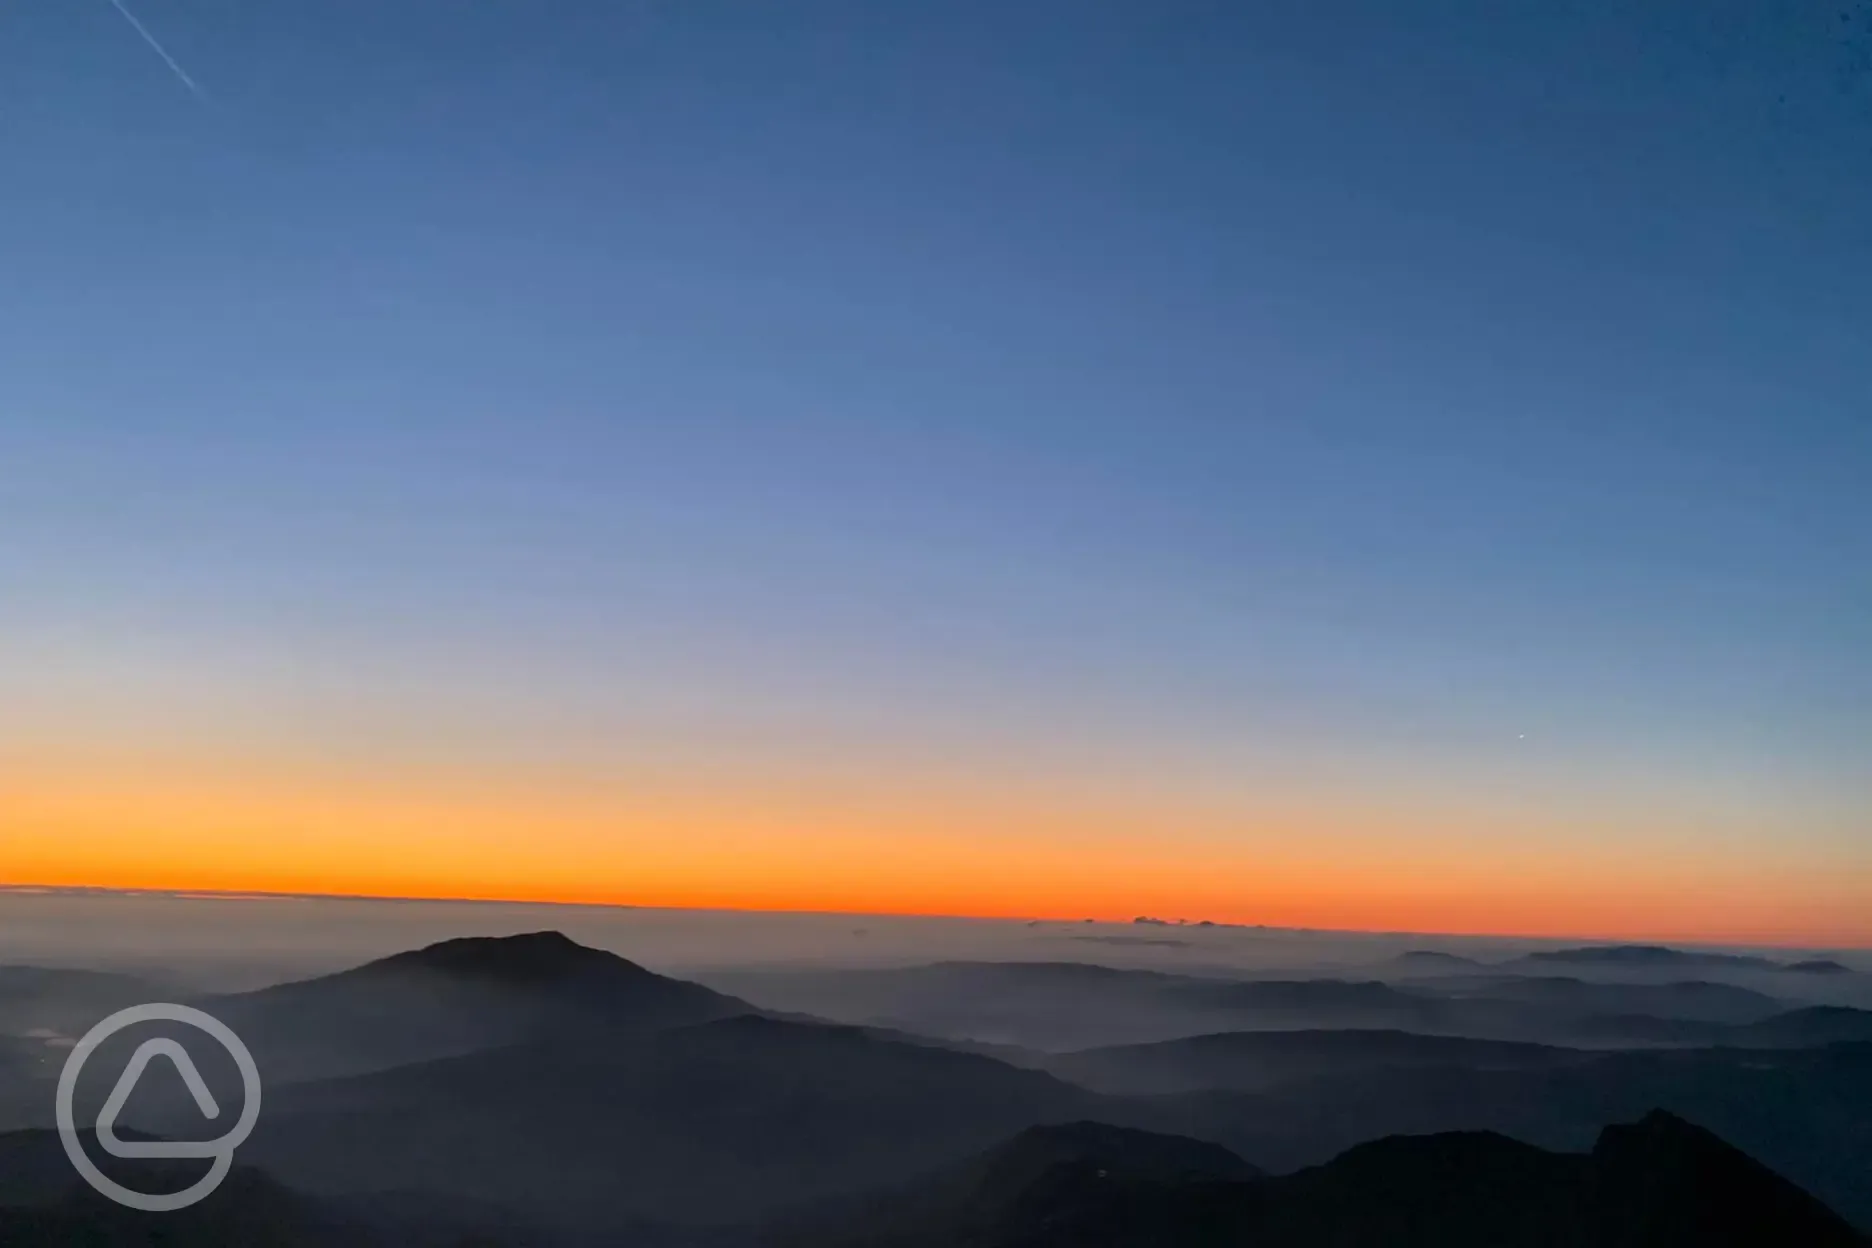 The sunrise from the summit of Snowdon Yr Wyddfa - 10 minutes away